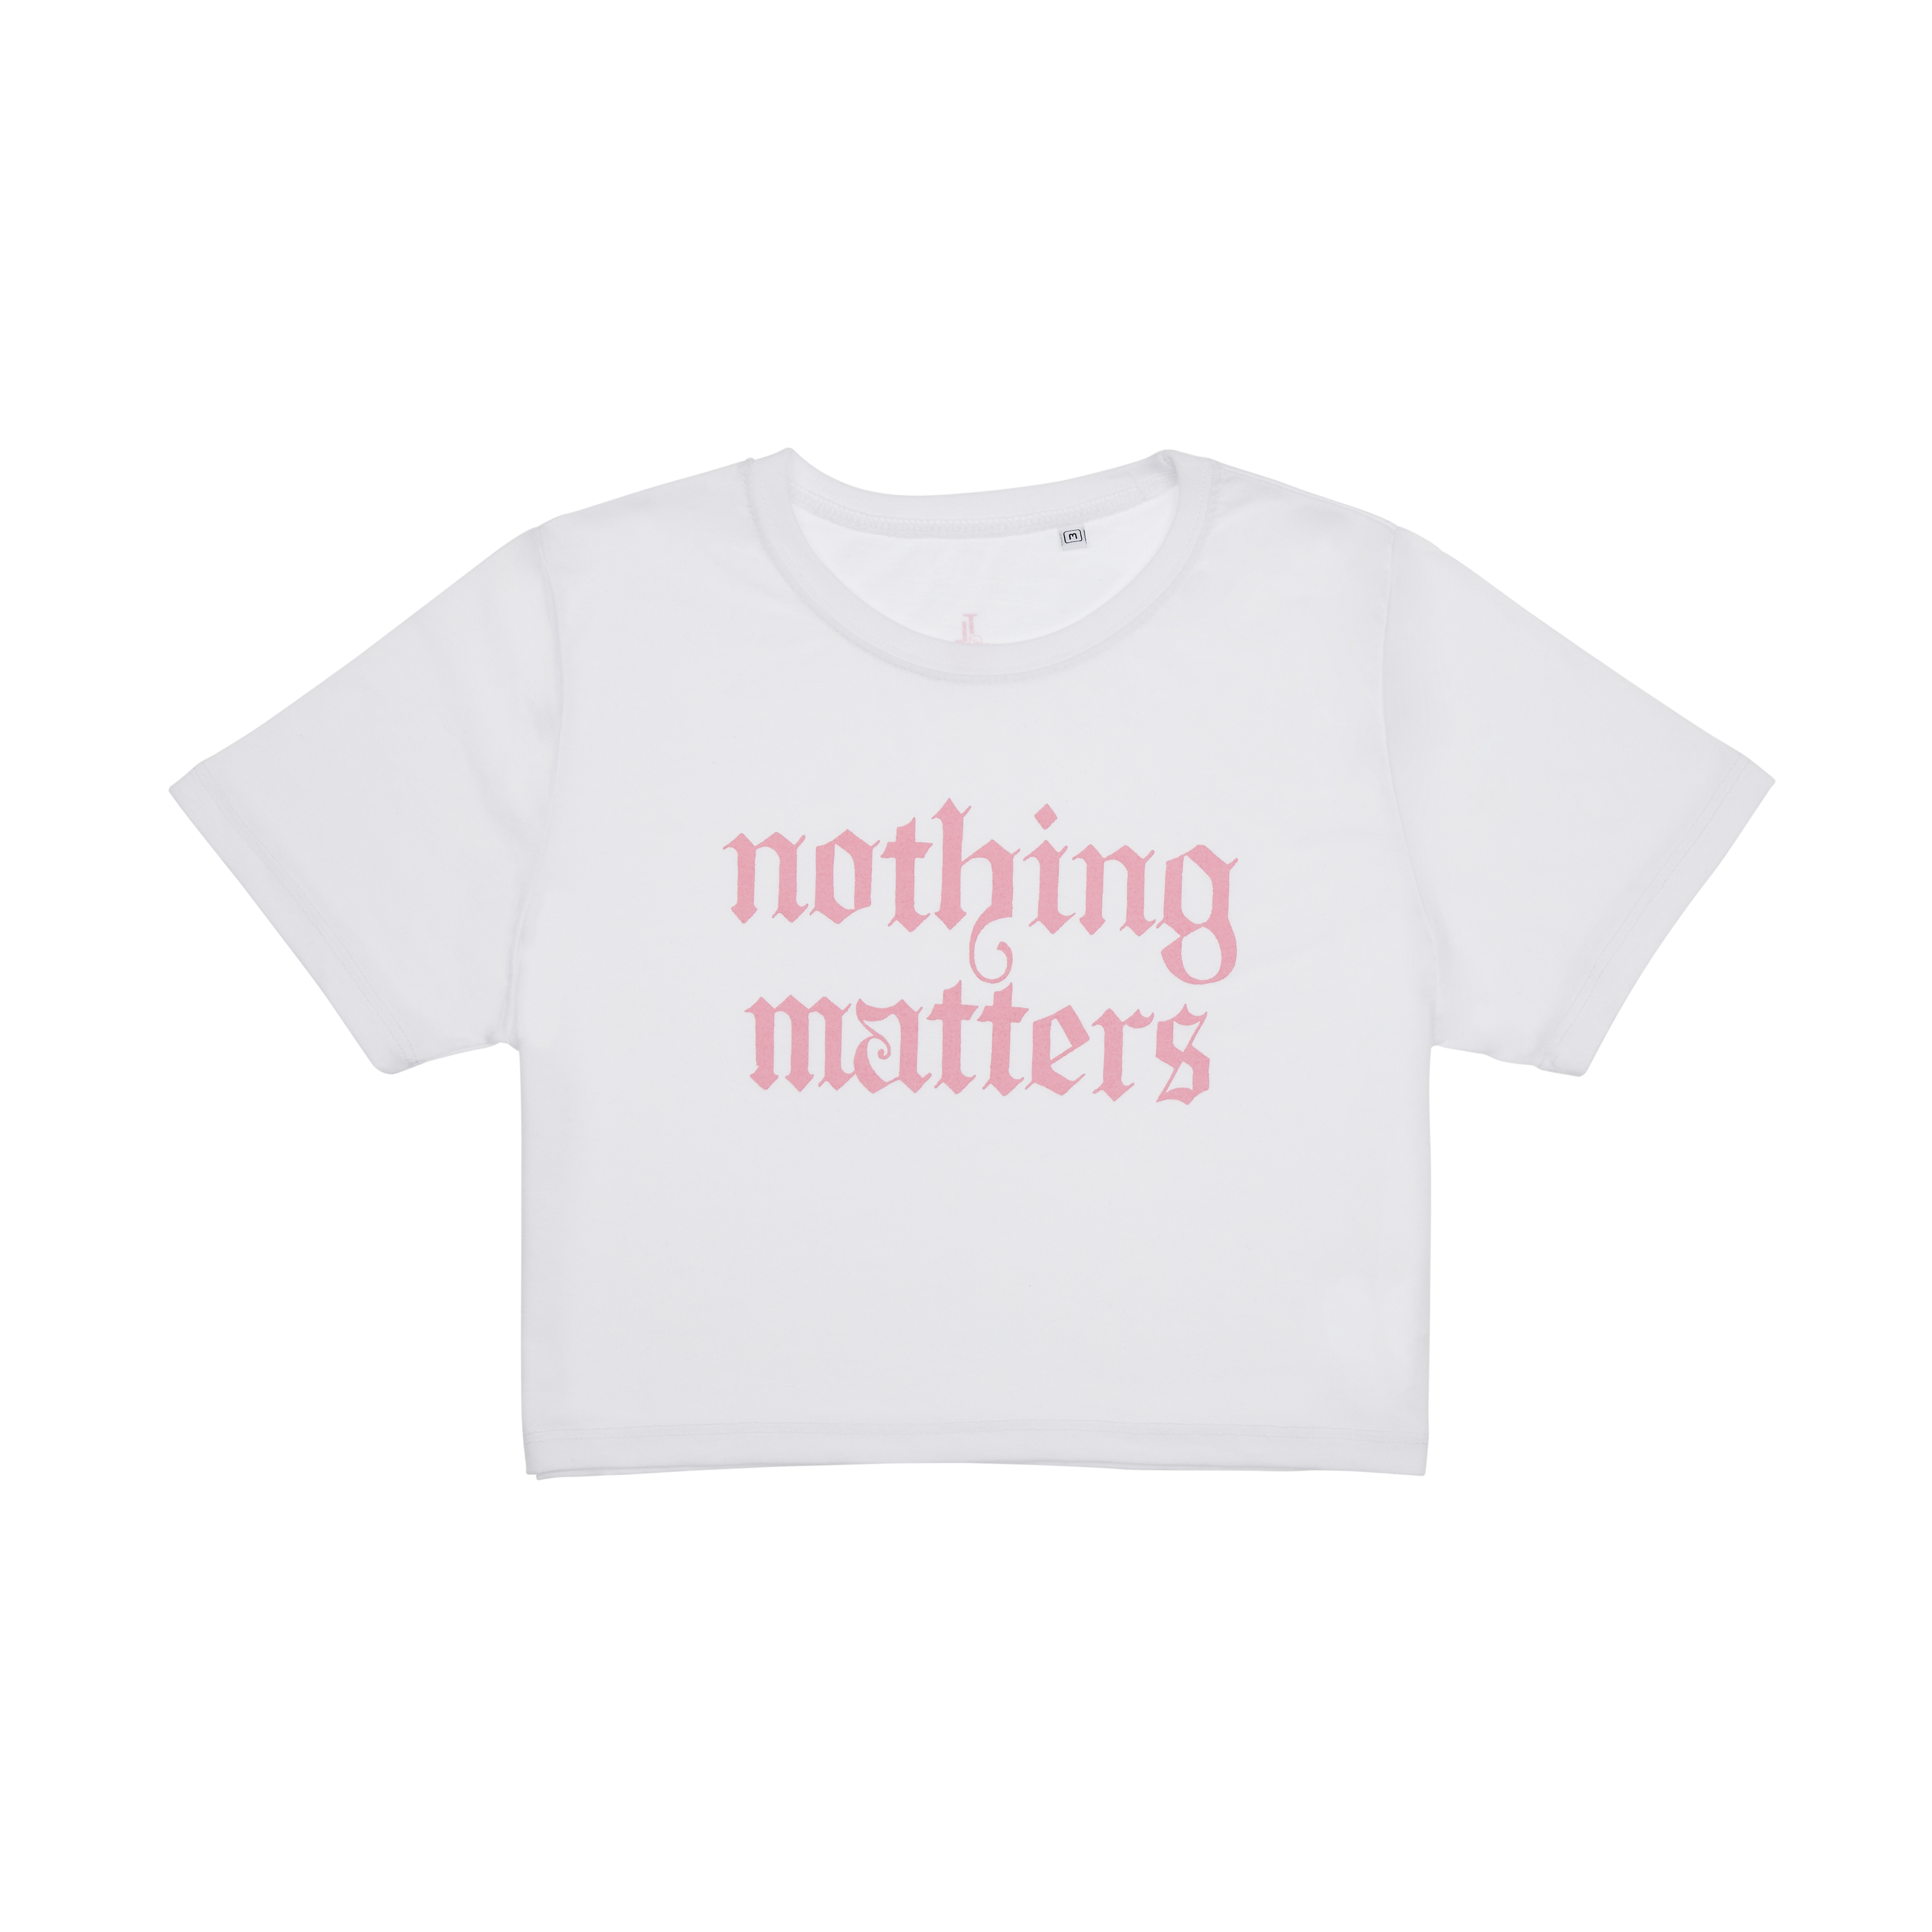 The Last Dinner Party - Nothing Matters: Baby Tee